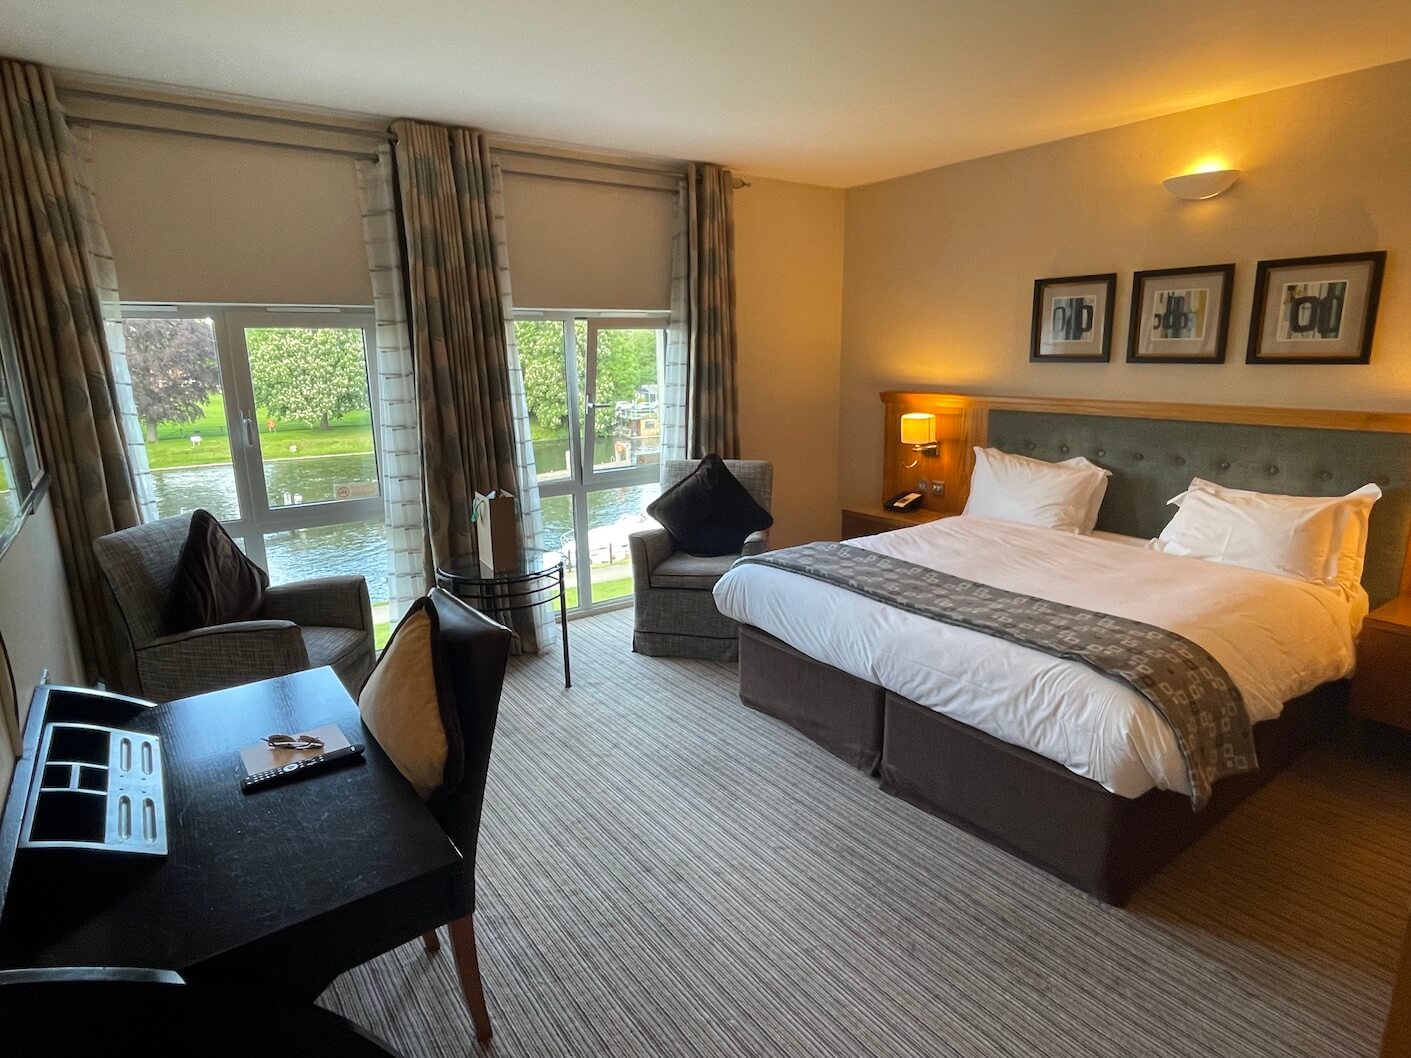 Deluxe bedroom at The Runnymede hotel and spa